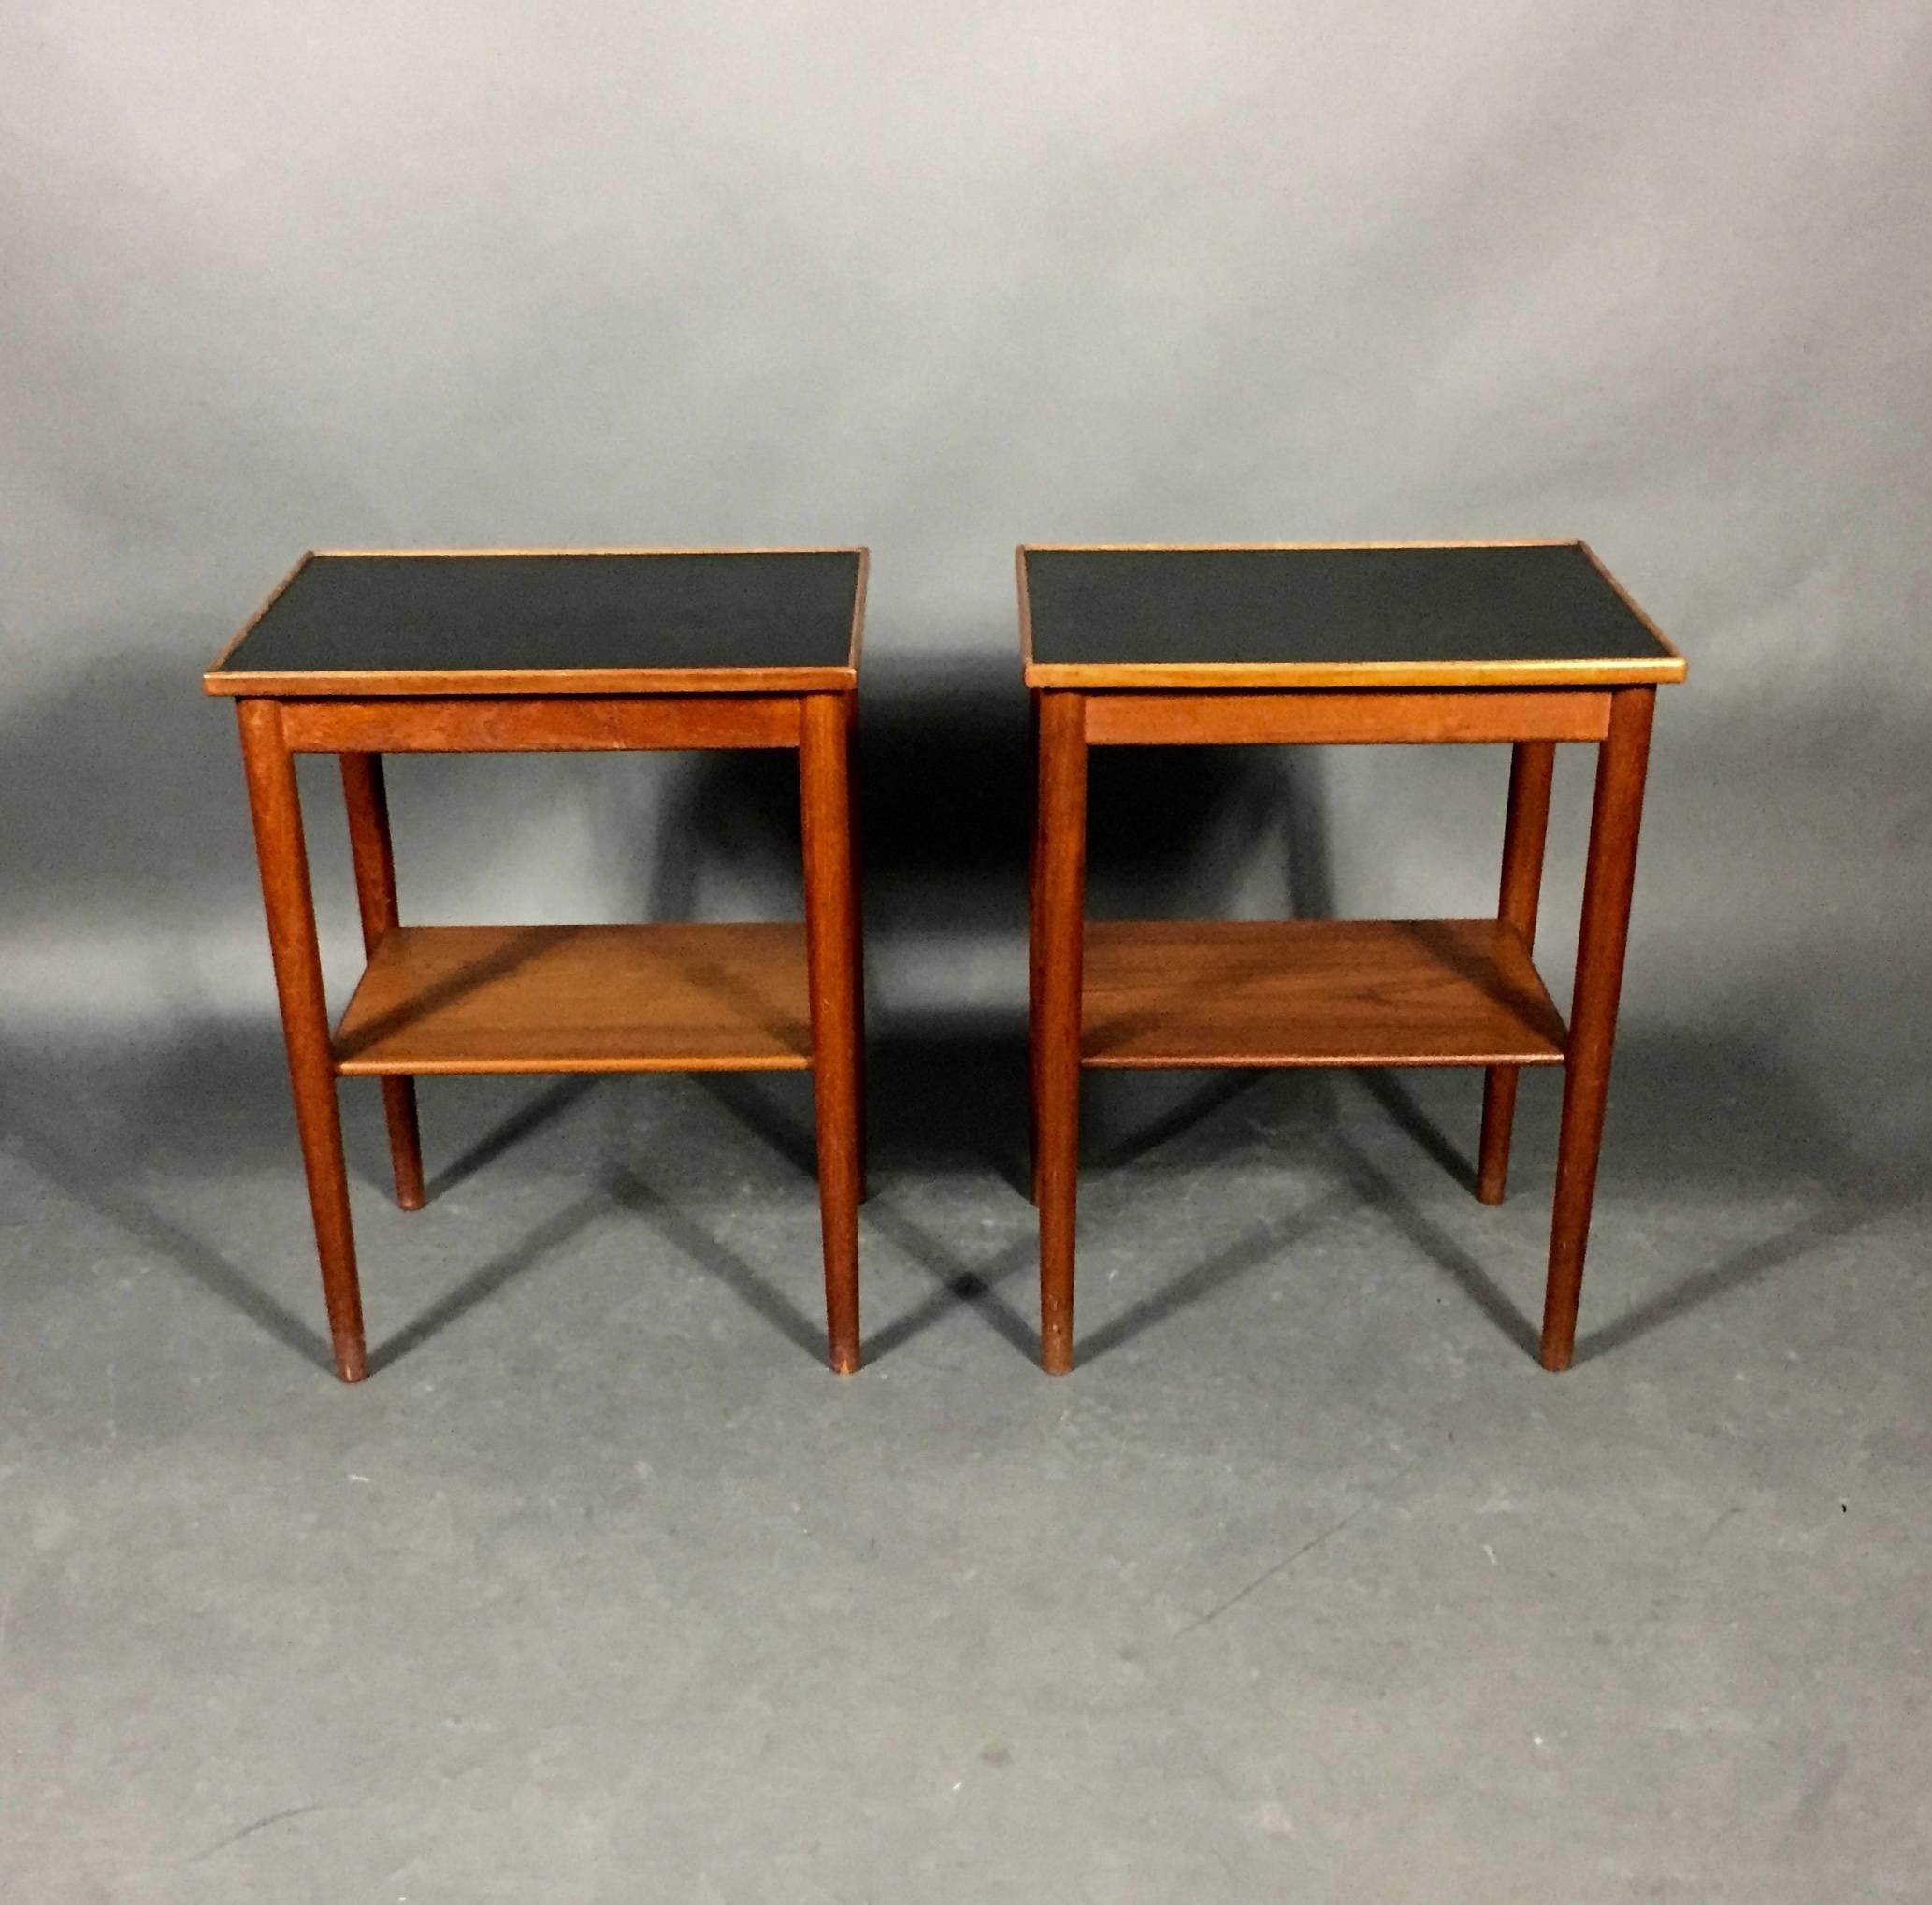 Danish furniture design: Stylish pair of side tables with frame of teak, top with black formica. No marks.